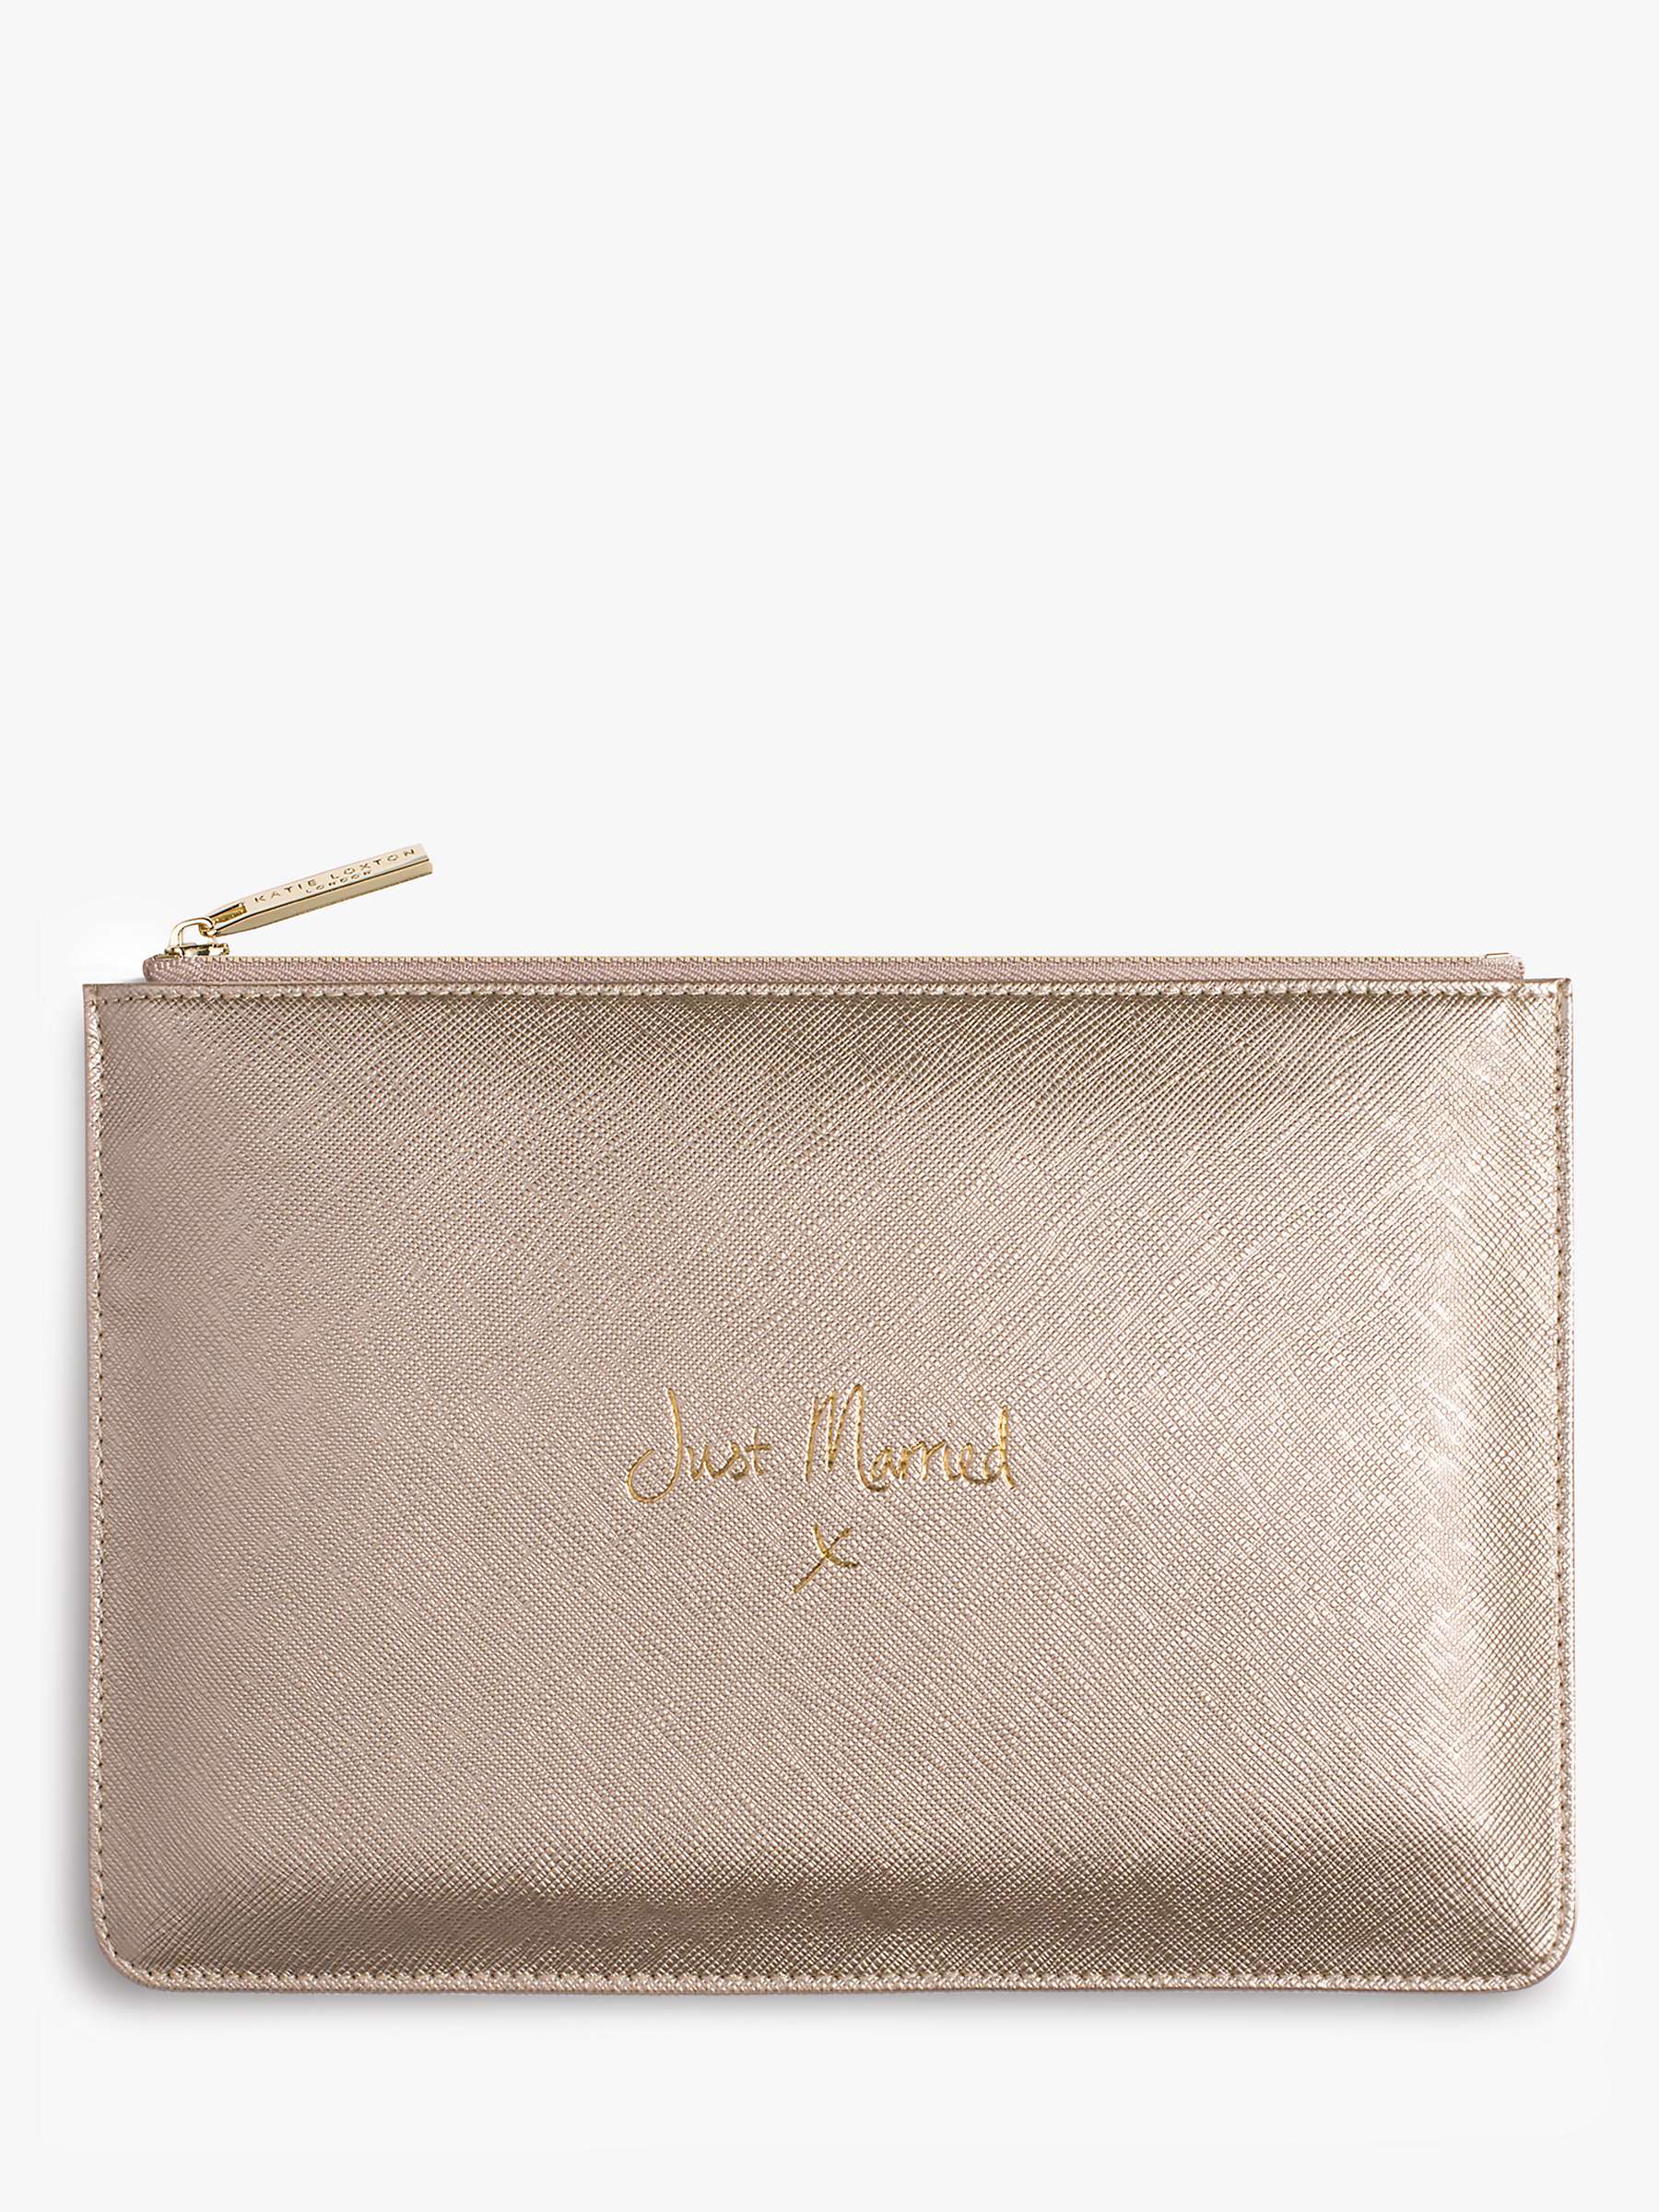 Buy Katie Loxton 'Just Married' Perfect Pouch, Metallic Online at johnlewis.com